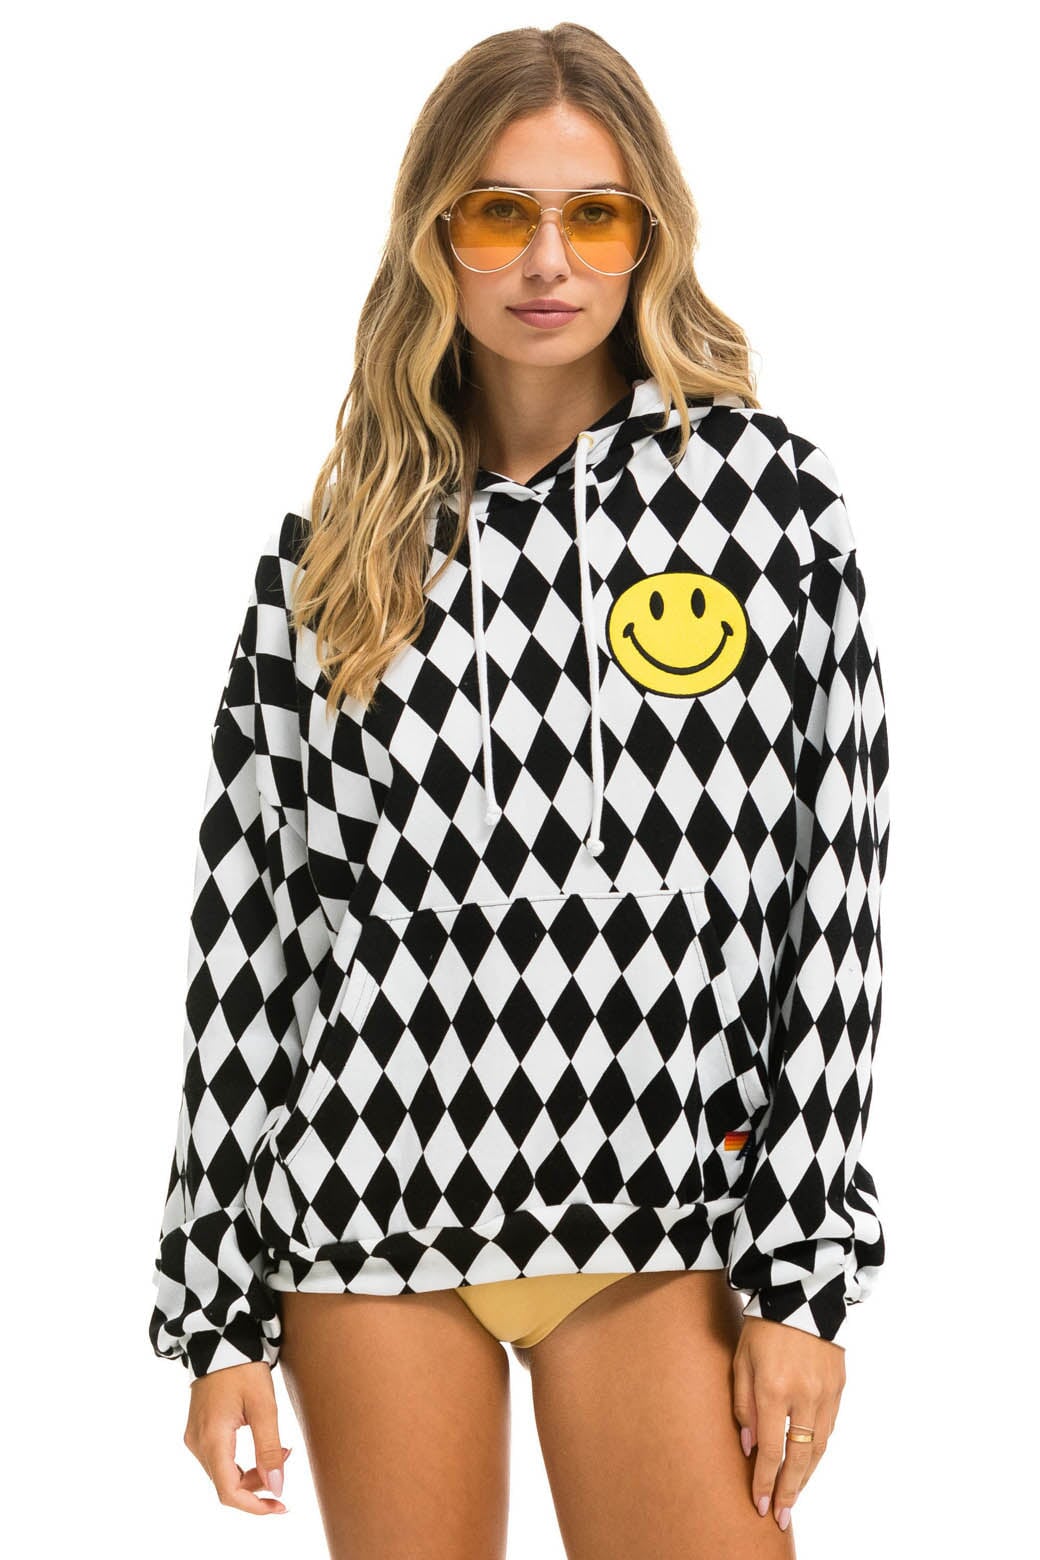 DIAMOND SMILEY 2 EMBRIODERY RELAXED PULLOVER HOODIE - WHITE // BLACK Hoodie Aviator Nation 